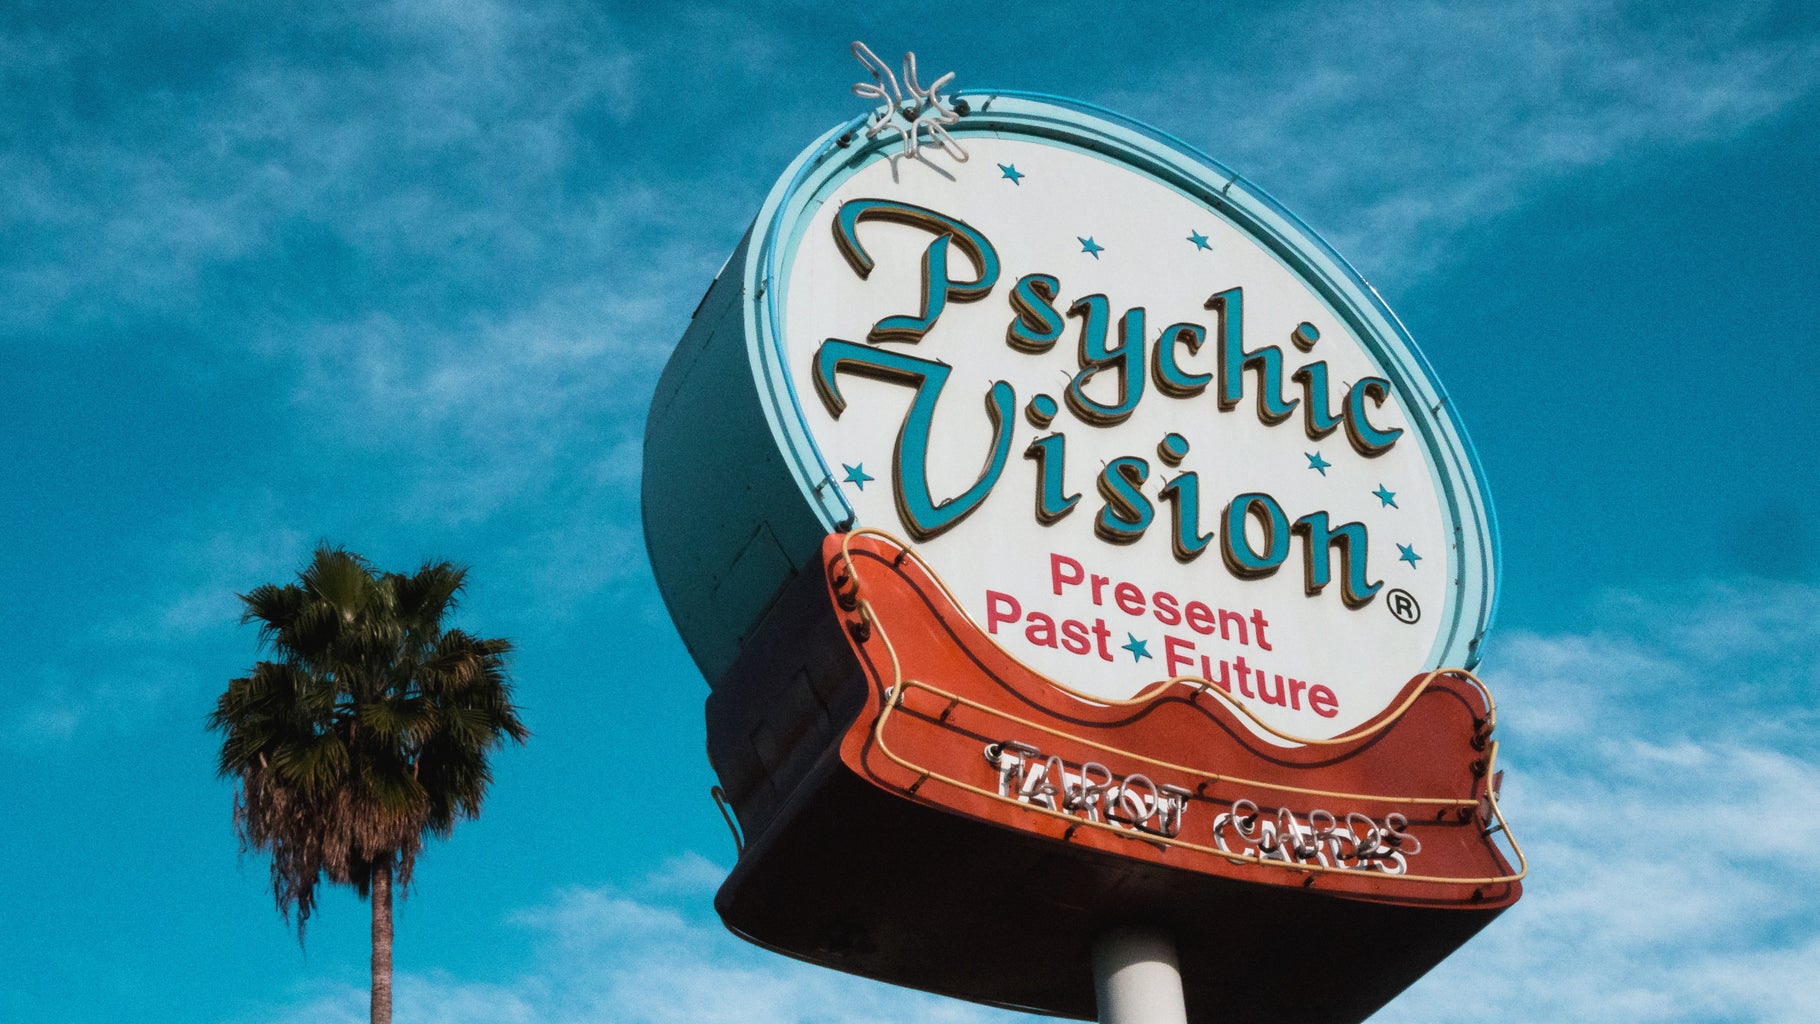 A blue, white and red \'Psychic Vision, Present Past Future, Tarot Cards\' sign with a palm tree in the background